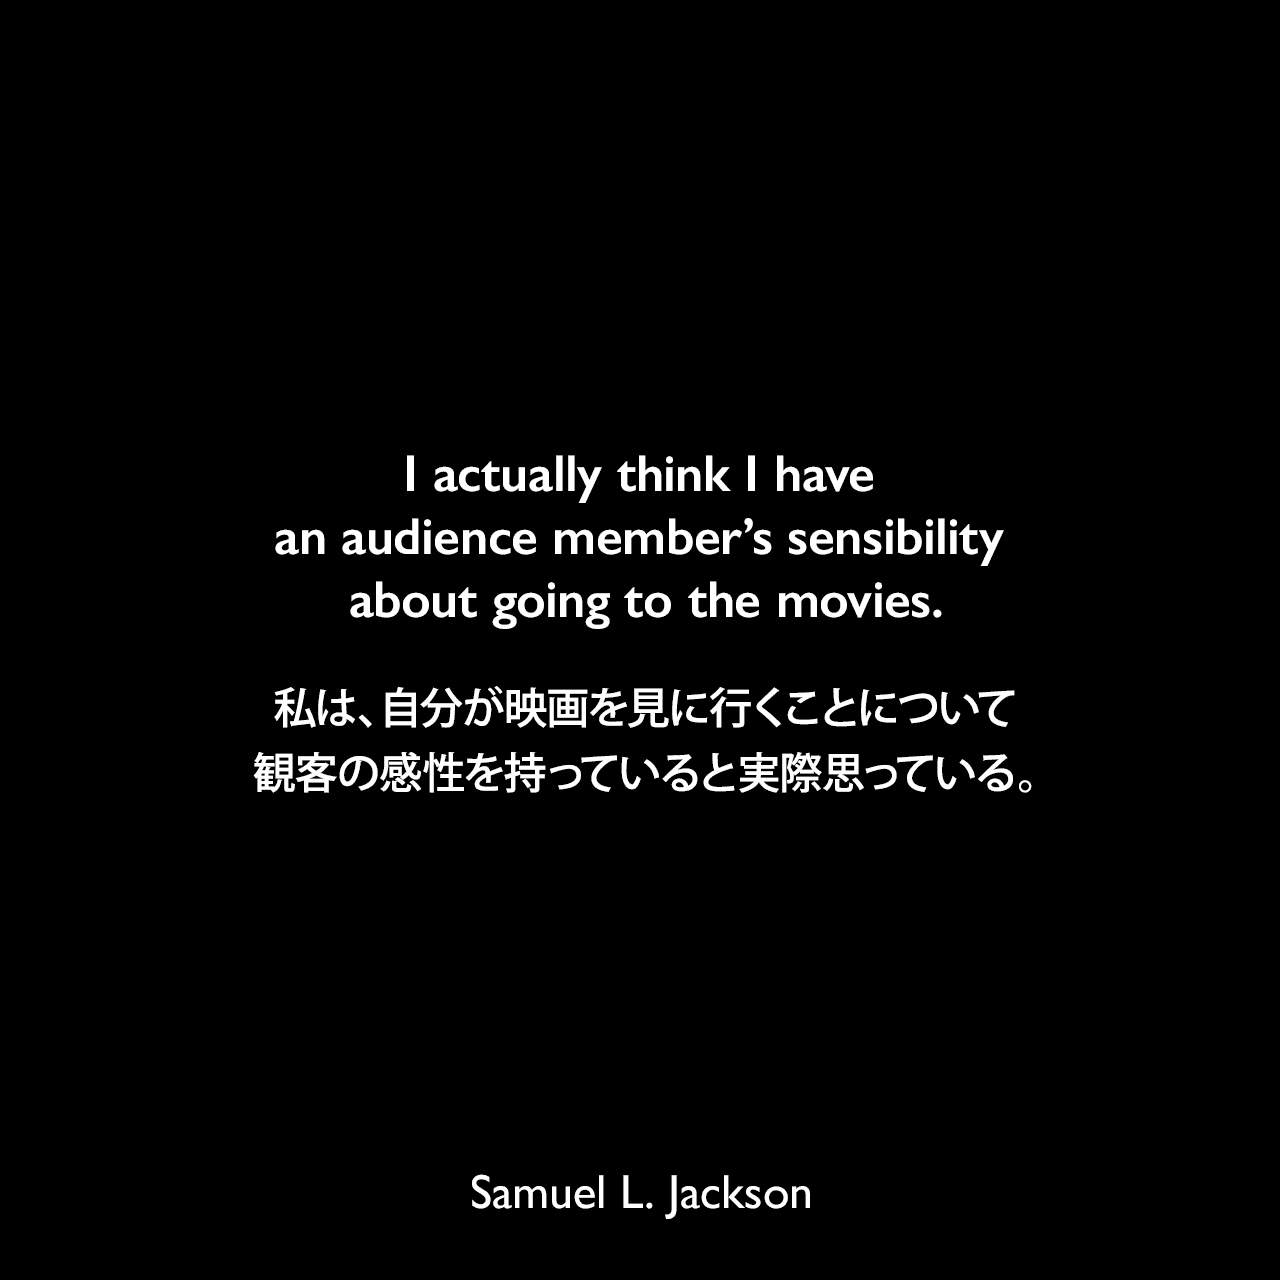 I actually think I have an audience member’s sensibility about going to the movies.私は、自分が映画を見に行くことについて観客の感性を持っていると実際思っている。Samuel Leroy Jackson